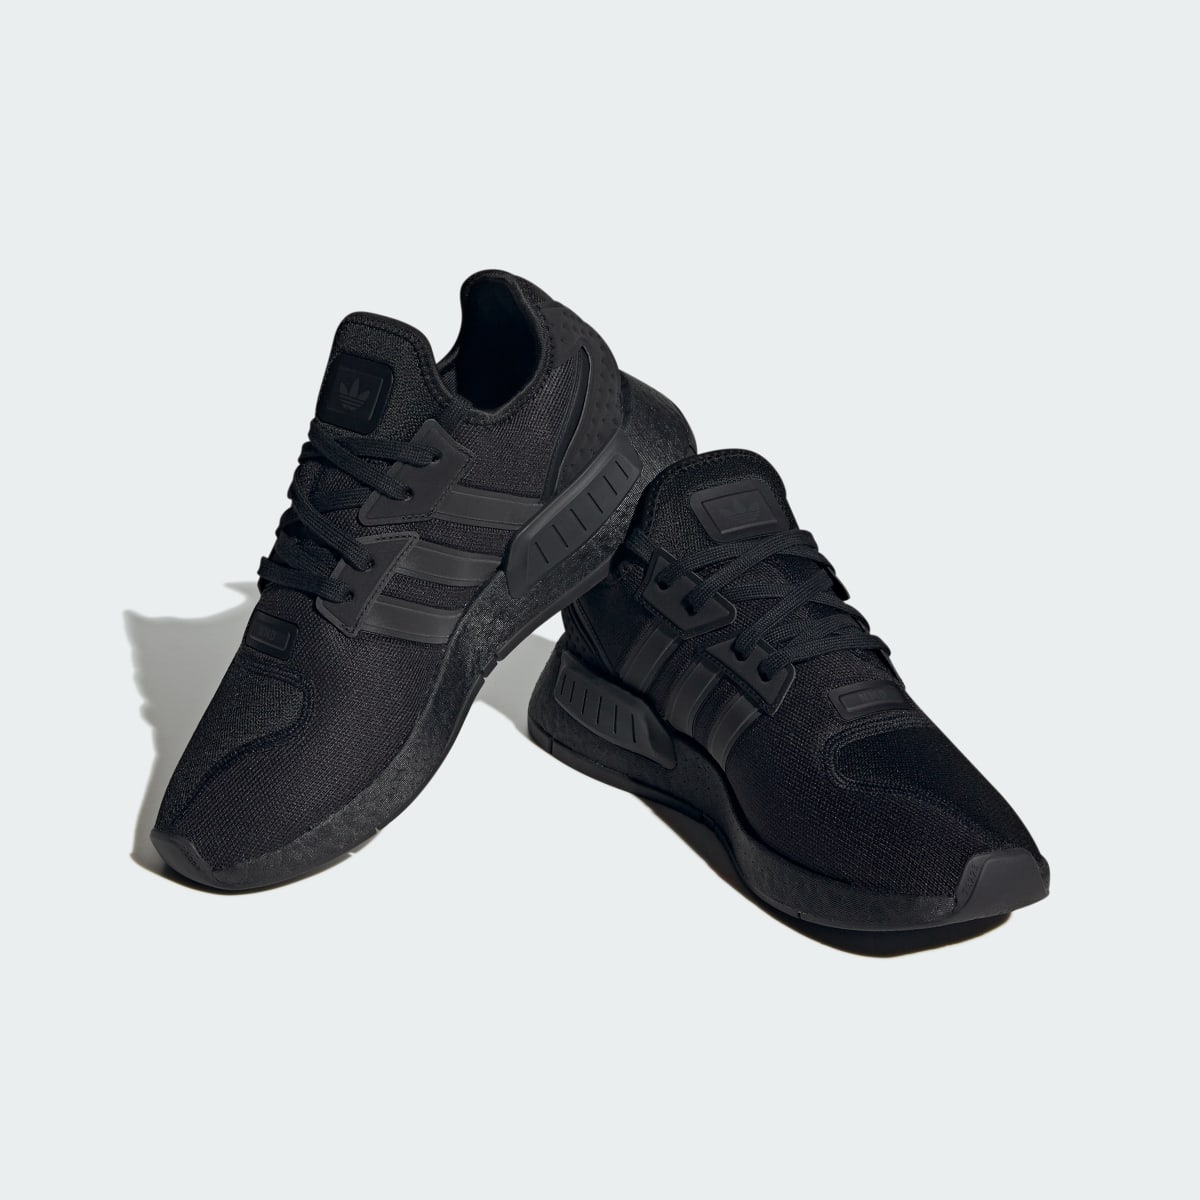 Adidas NMD_G1 Shoes. 11